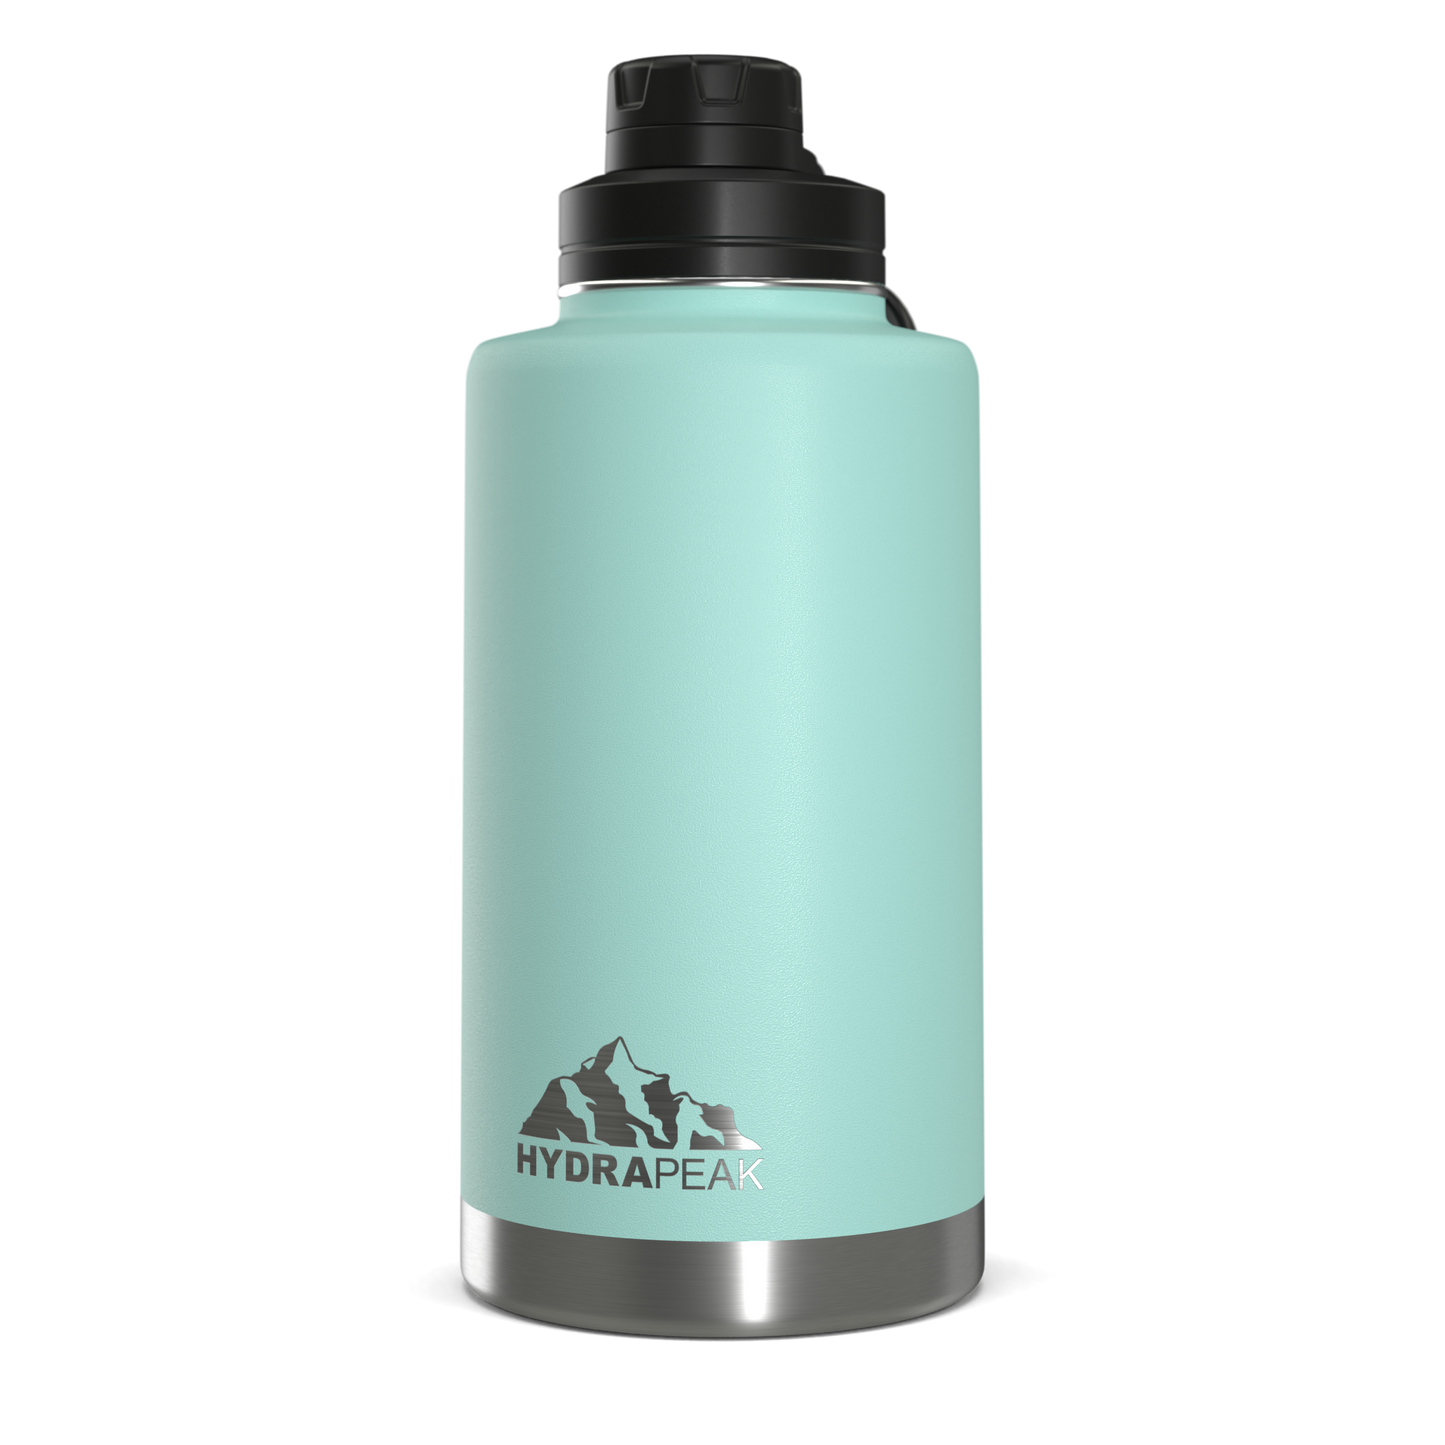 50oz Stainless Steel Insulated Large Water Bottle With Chug Lid - Aqua